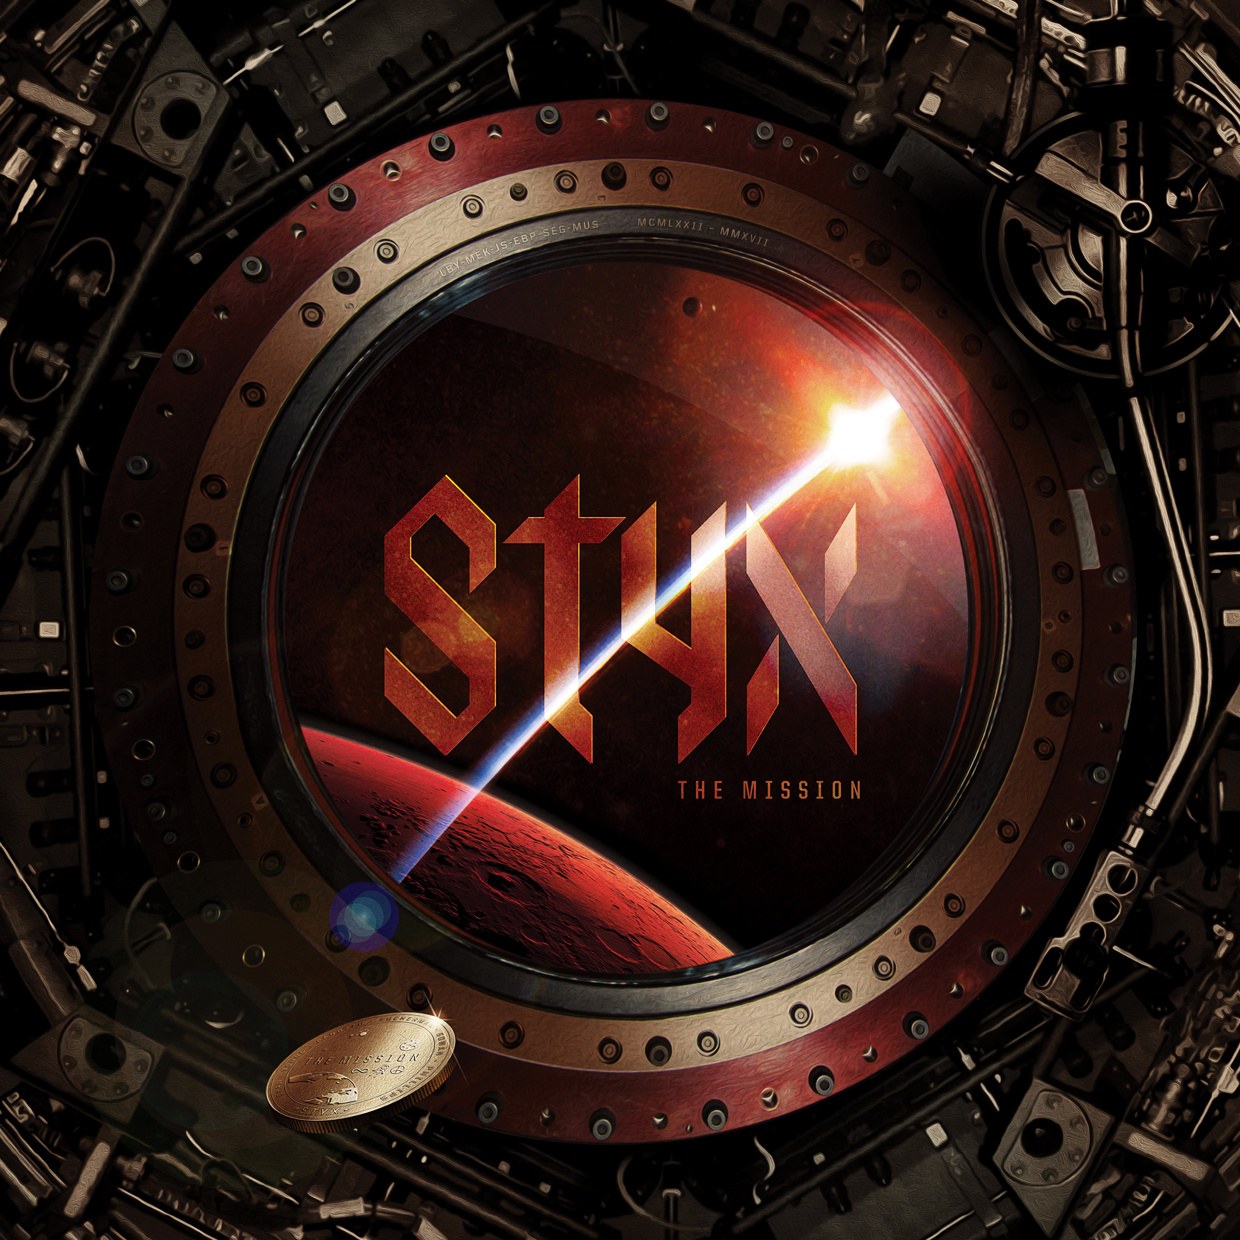 Styx – Classic Prog Rockers Return With The Mission!